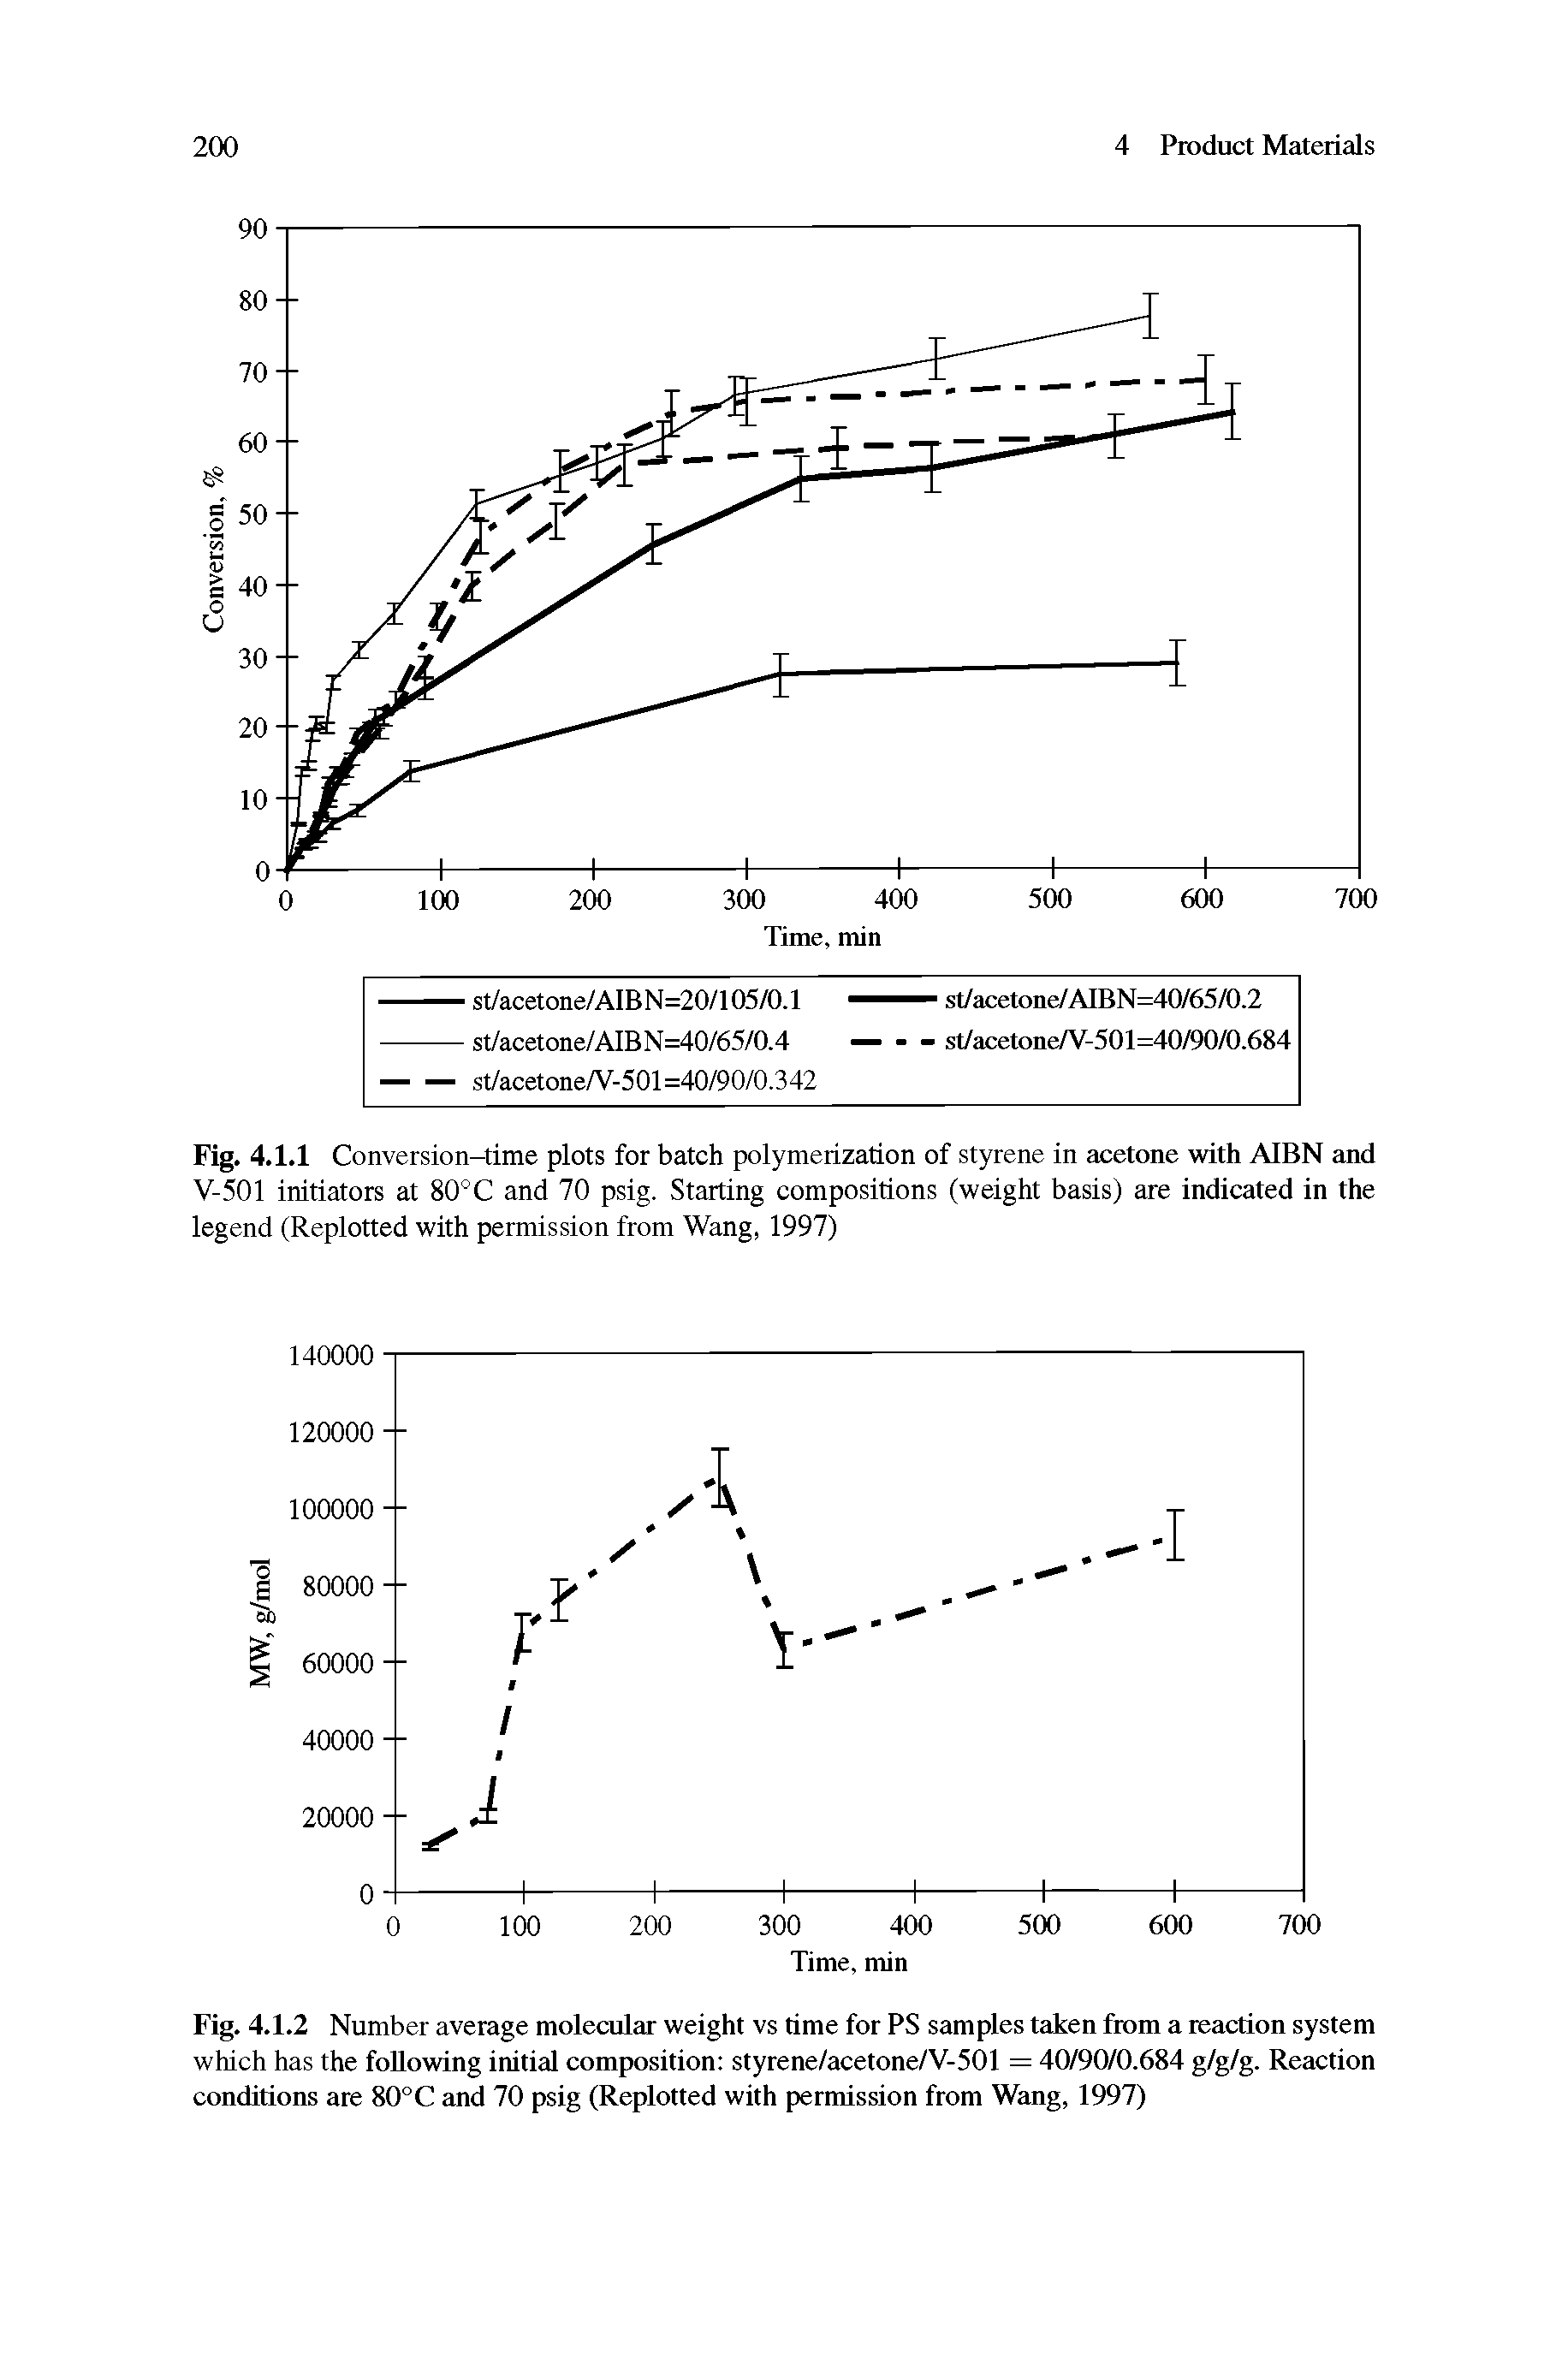 Fig. 4.1.1 Conversion-time plots for batch polymerization of styrene in acetone with AIBN and V-501 initiators at 80°C and 70 psig. Starting compositions (weight basis) are indicated in the legend (Replotted with permission from Wang, 1997)...